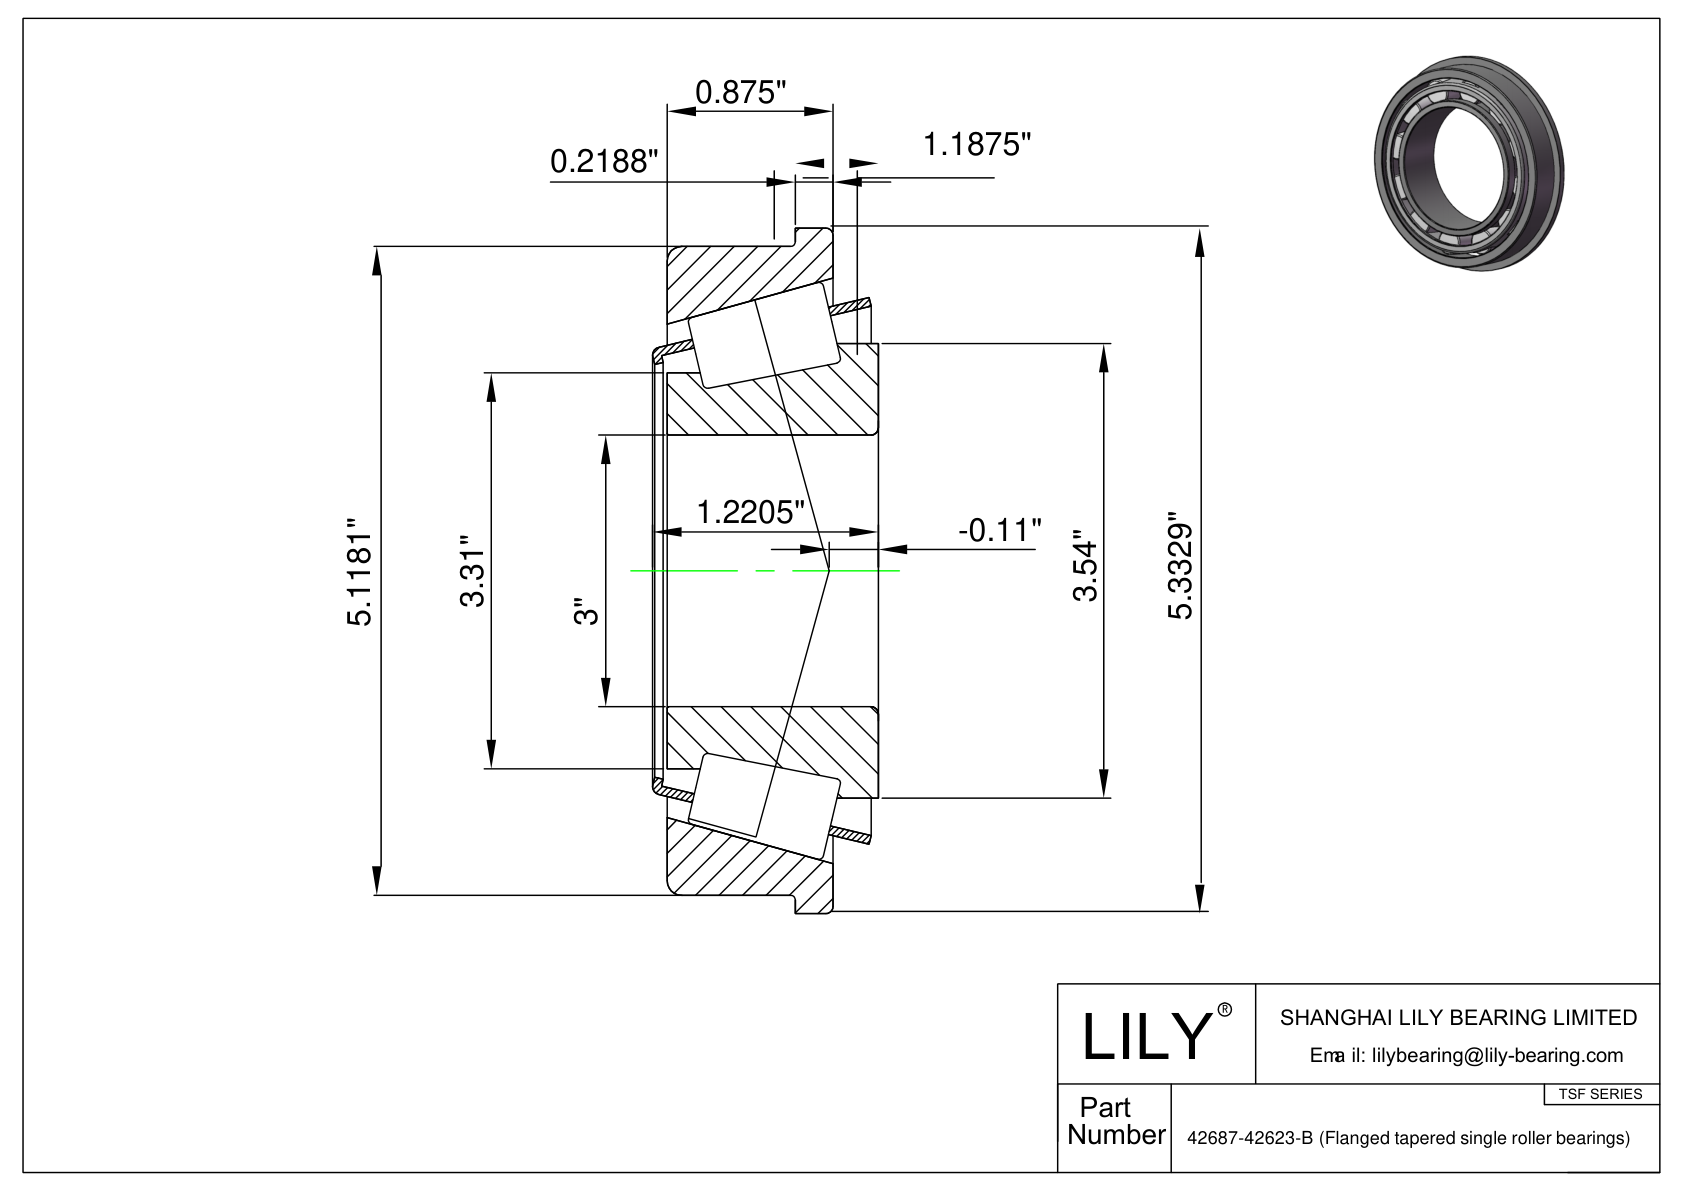 42687-42623-B TSF (Tapered Single Roller Bearings with Flange) (Imperial) cad drawing